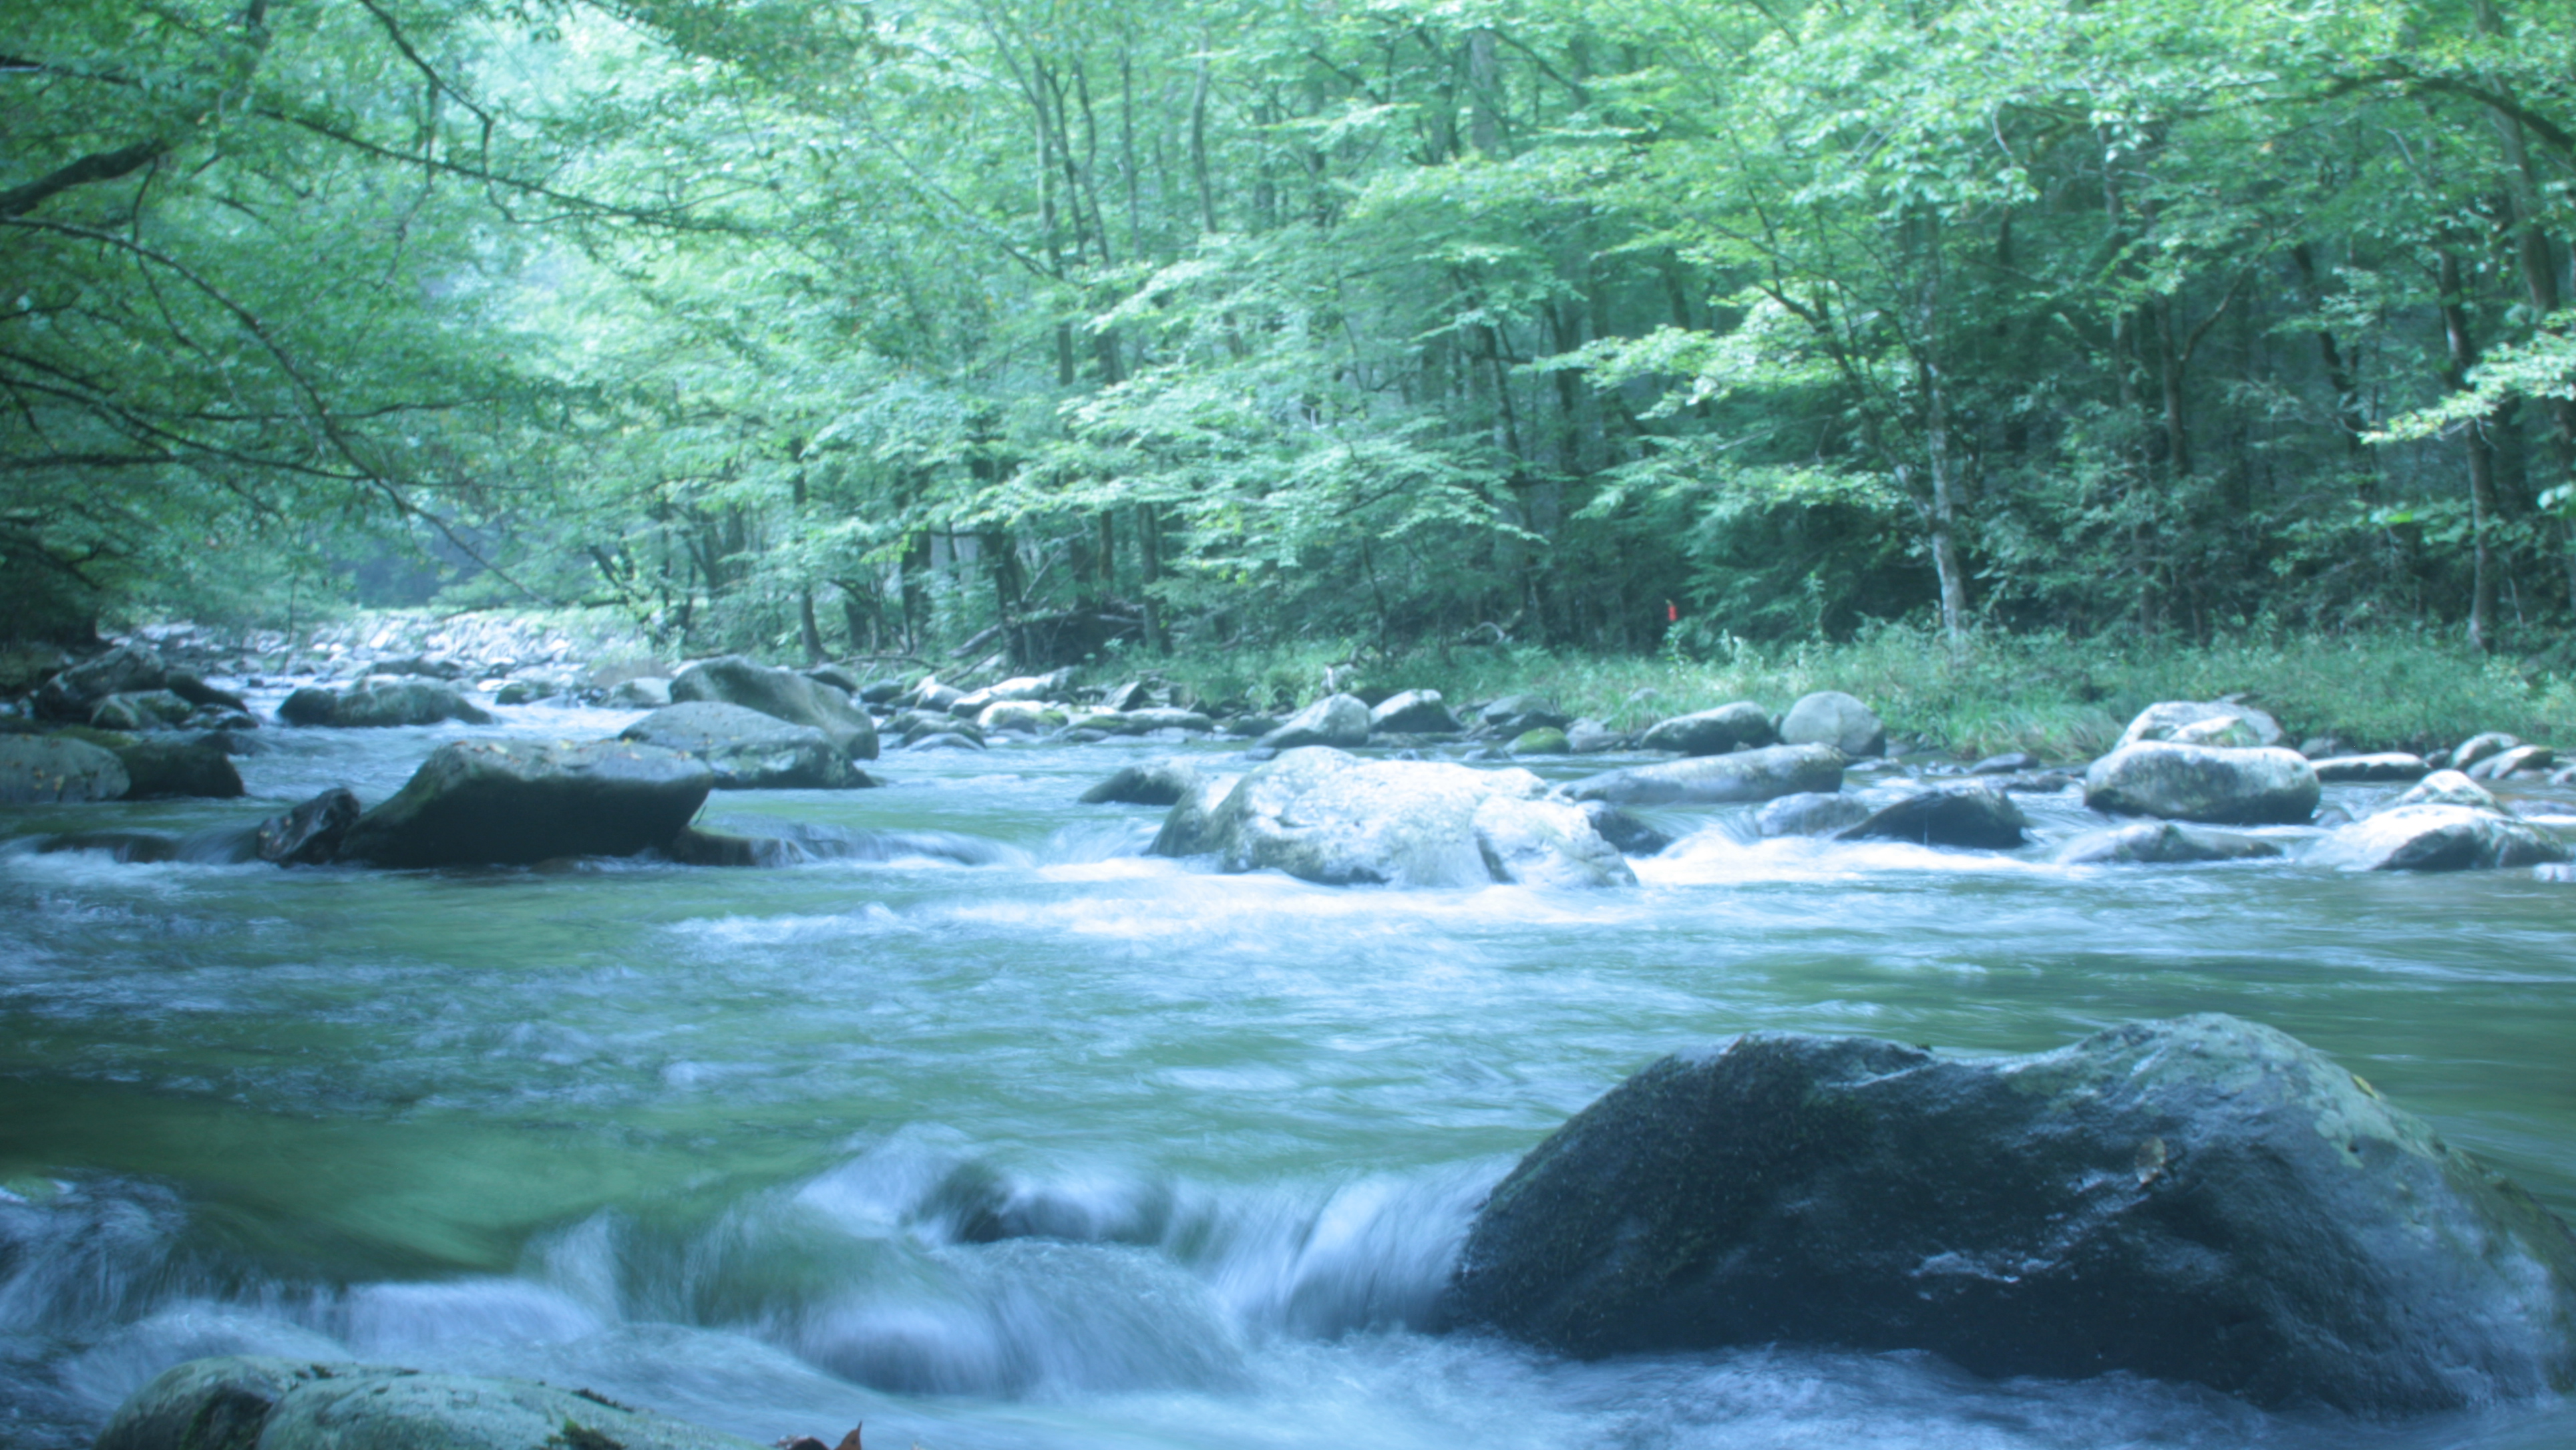 Water rushes downstream through large rocks in a creek surrounded by leafy green trees.